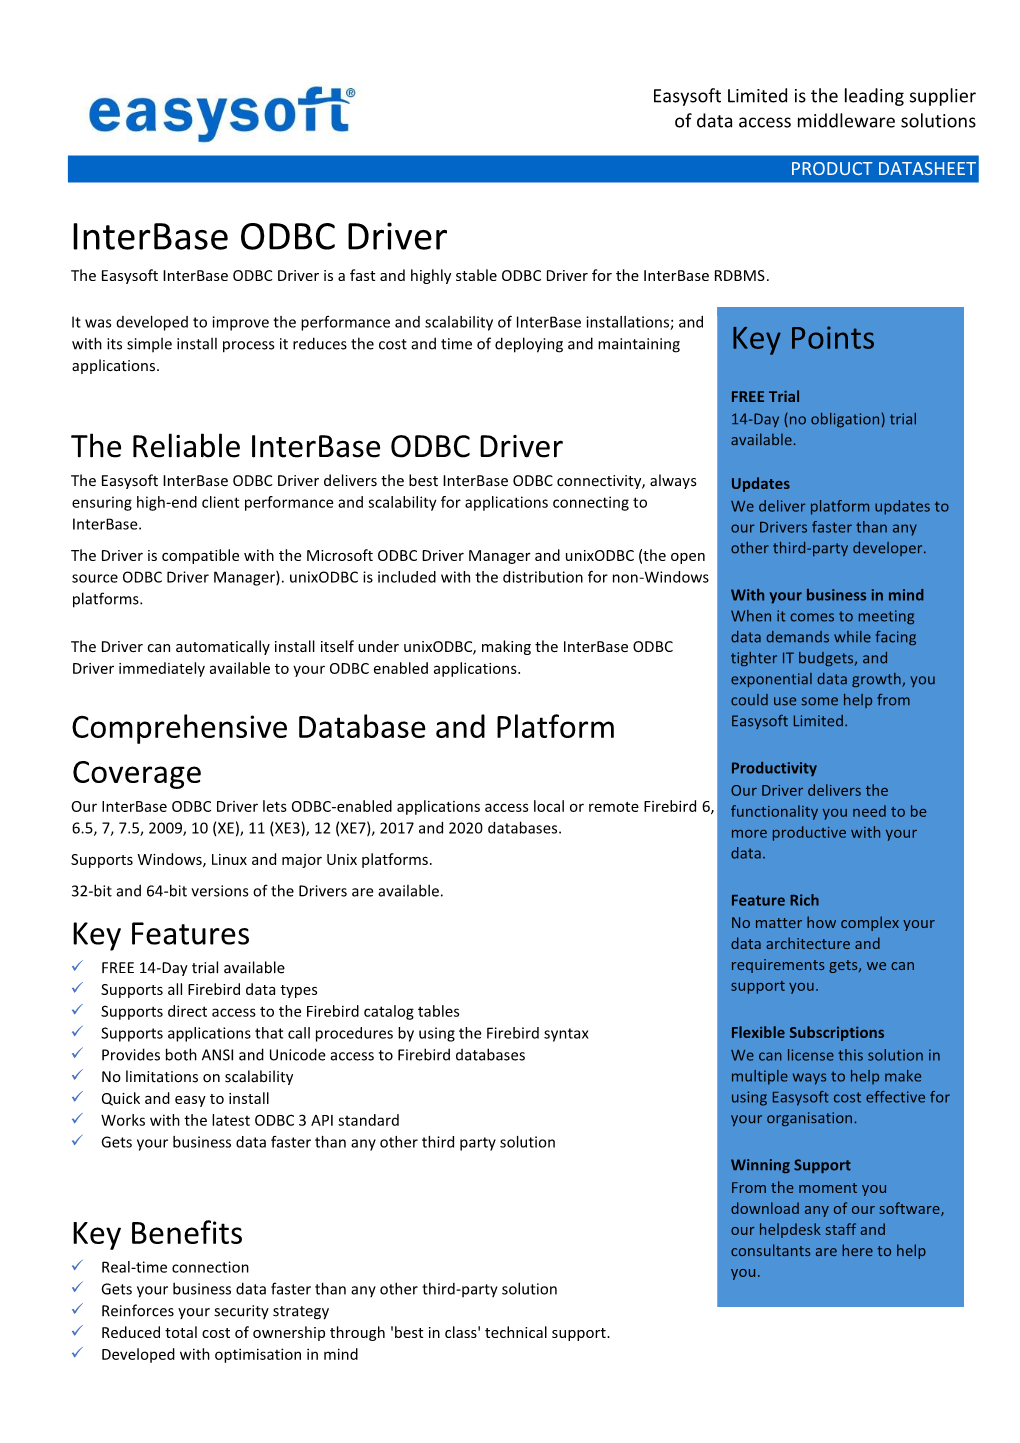 Interbase ODBC Driver the Easysoft Interbase ODBC Driver Is a Fast and Highly Stable ODBC Driver for the Interbase RDBMS